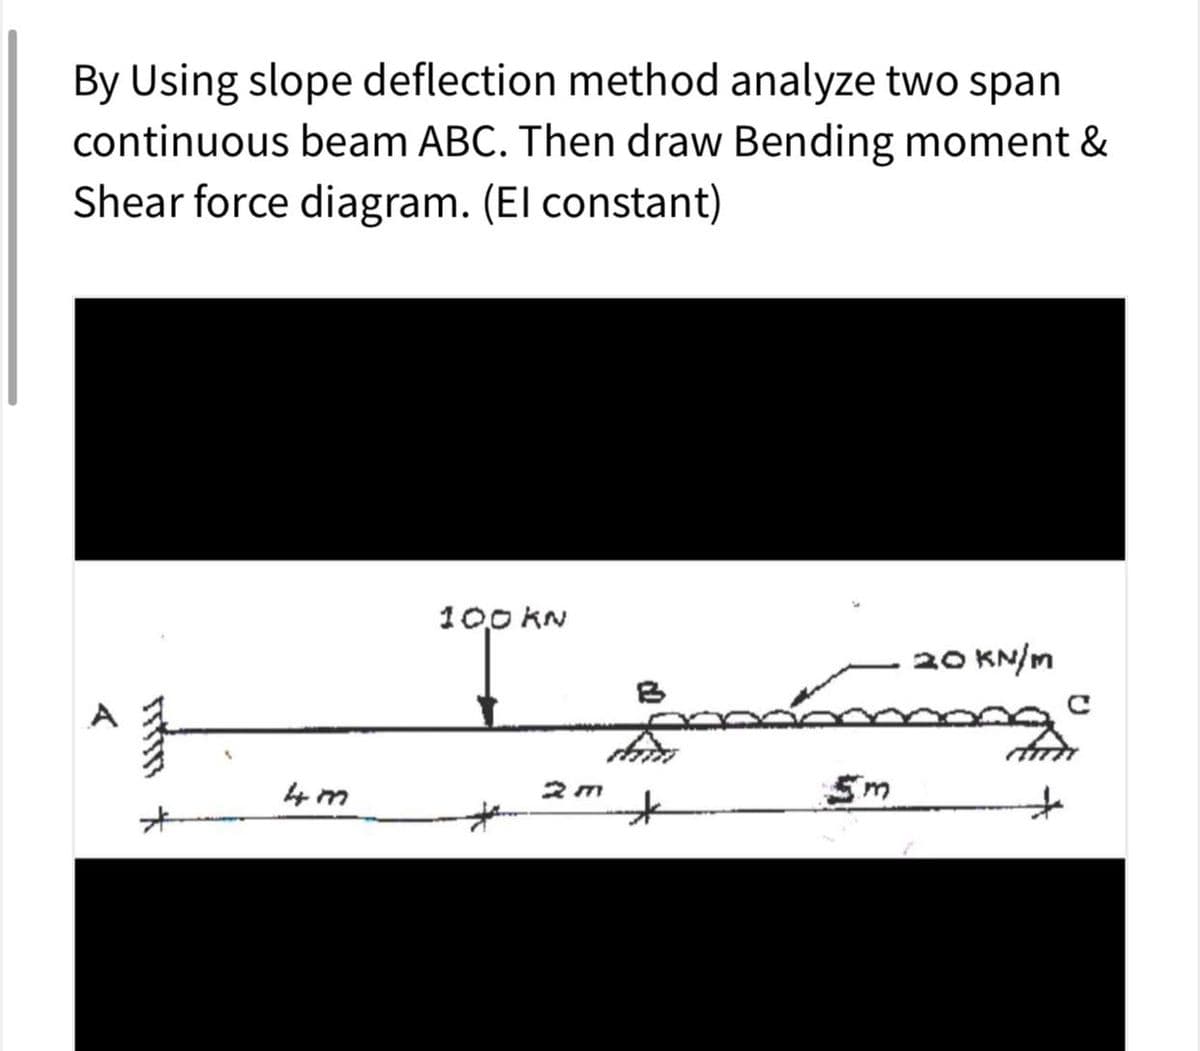 By Using slope deflection method analyze two span
continuous beam ABC. Then draw Bending moment &
Shear force diagram. (El constant)
100 KN
20 KN/m
Sm
